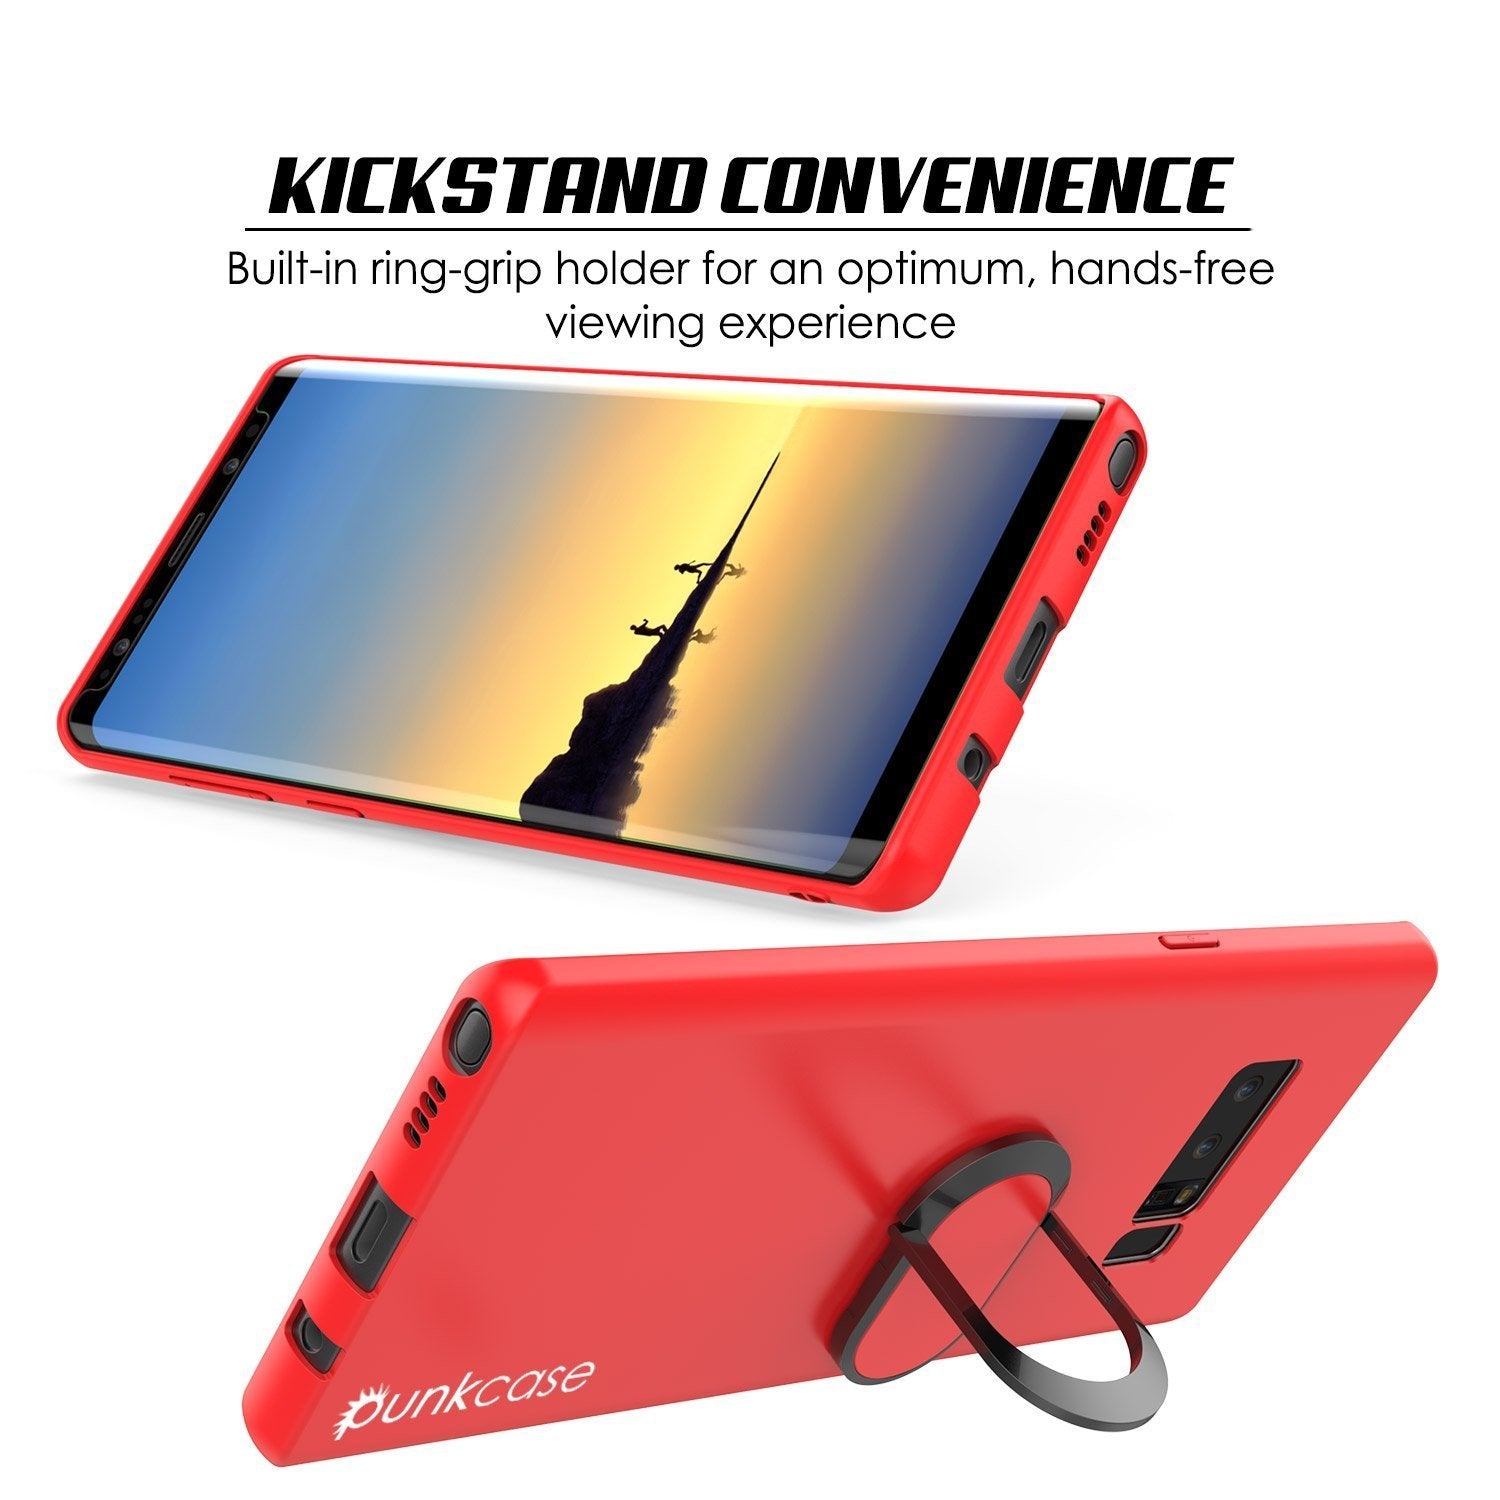 Galaxy Note 8 Case, Punkcase Magnetix Protective TPU Cover W/ Kickstand, Screen Protector [Red] - PunkCase NZ